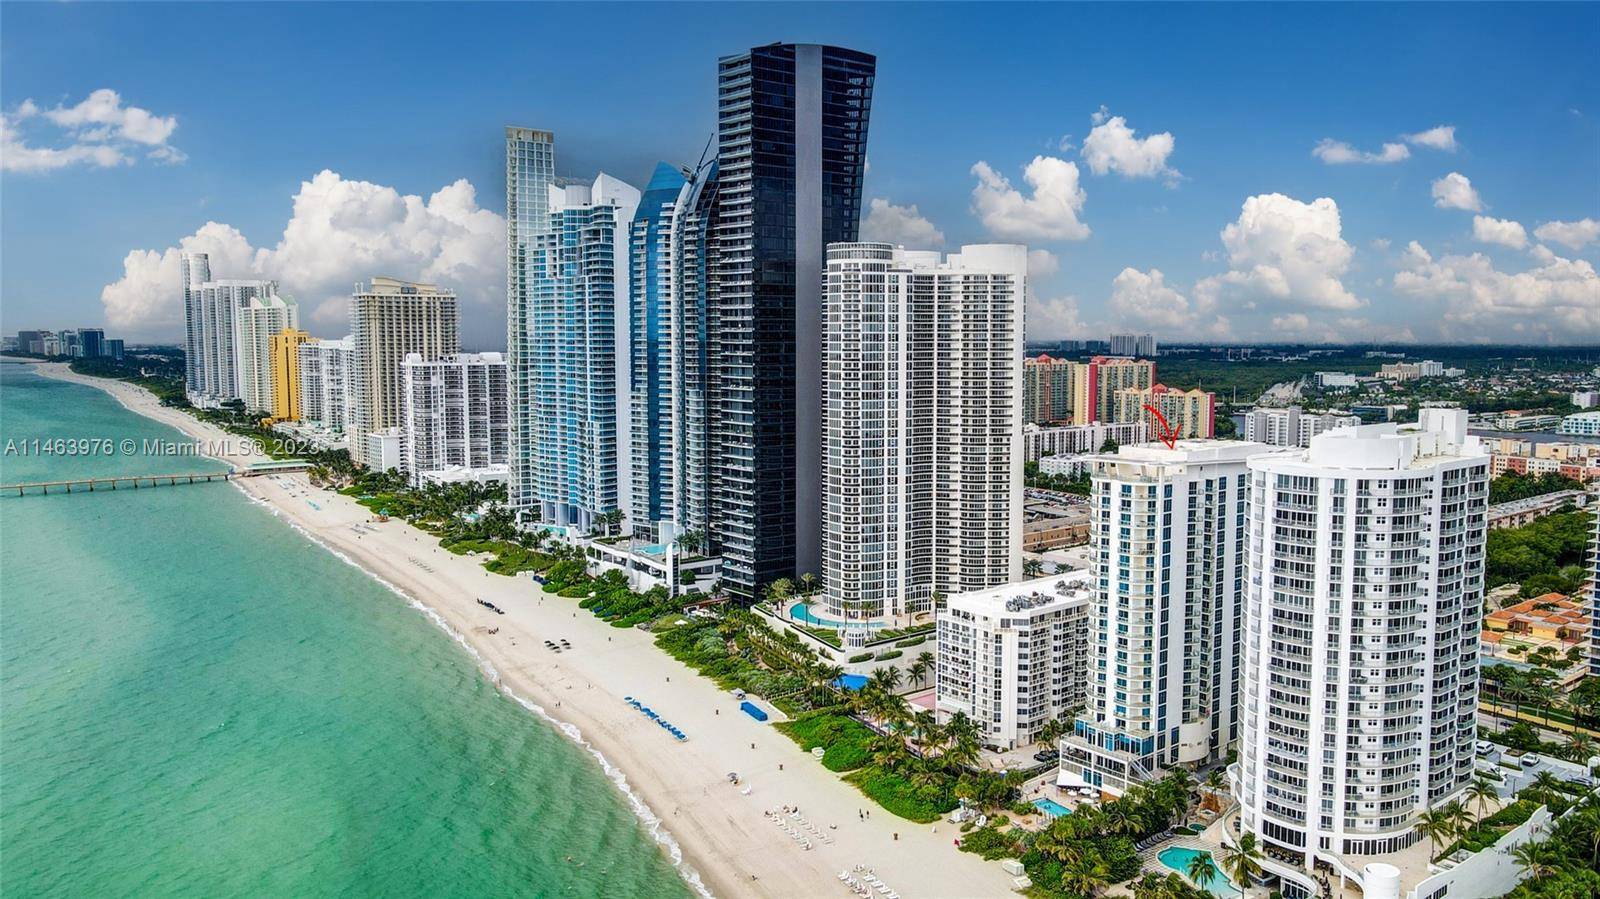 Experience luxury living at its finest in this exquisite 1 bedroom, 1 bathroom condo boasting 644 square feet of space and breathtaking intracoastal and ocean views at Sole Sunny Isles.